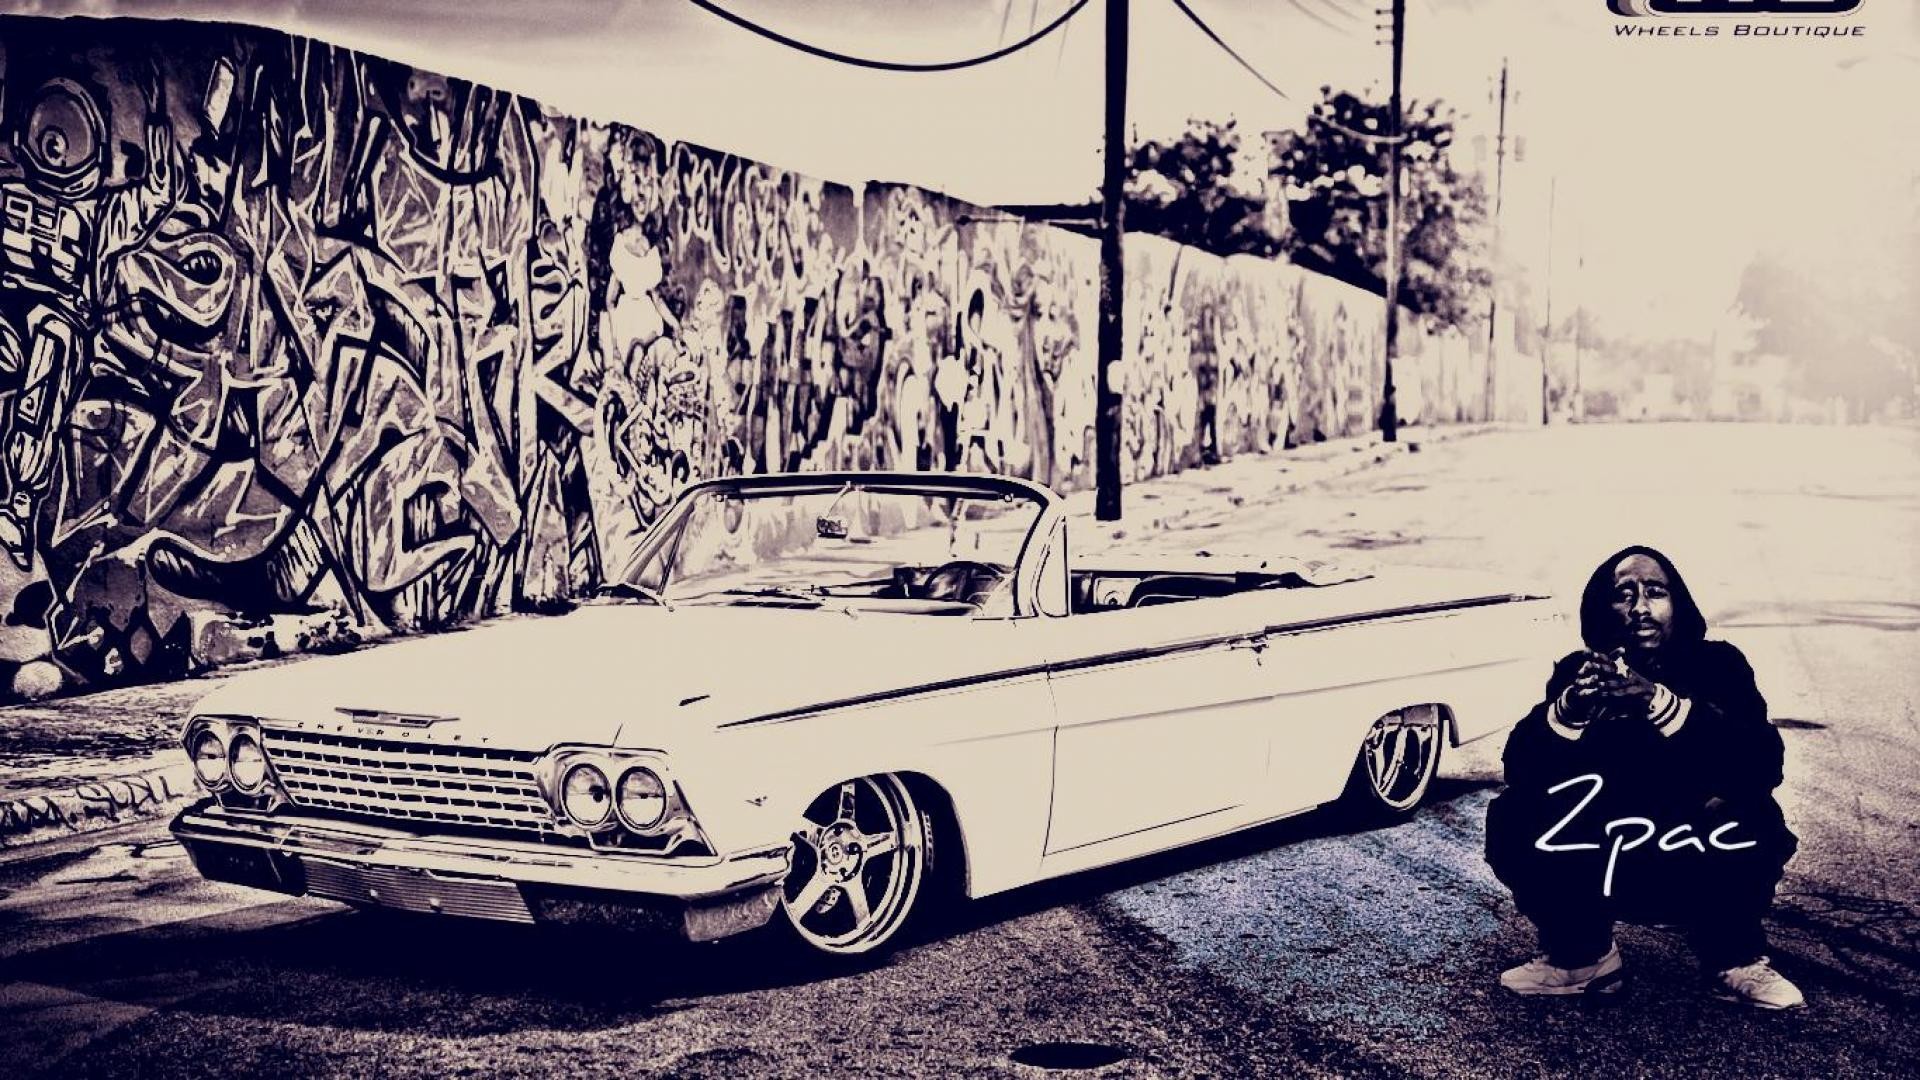 1920x1080 Lowrider background for your phone iPhone android computer or 